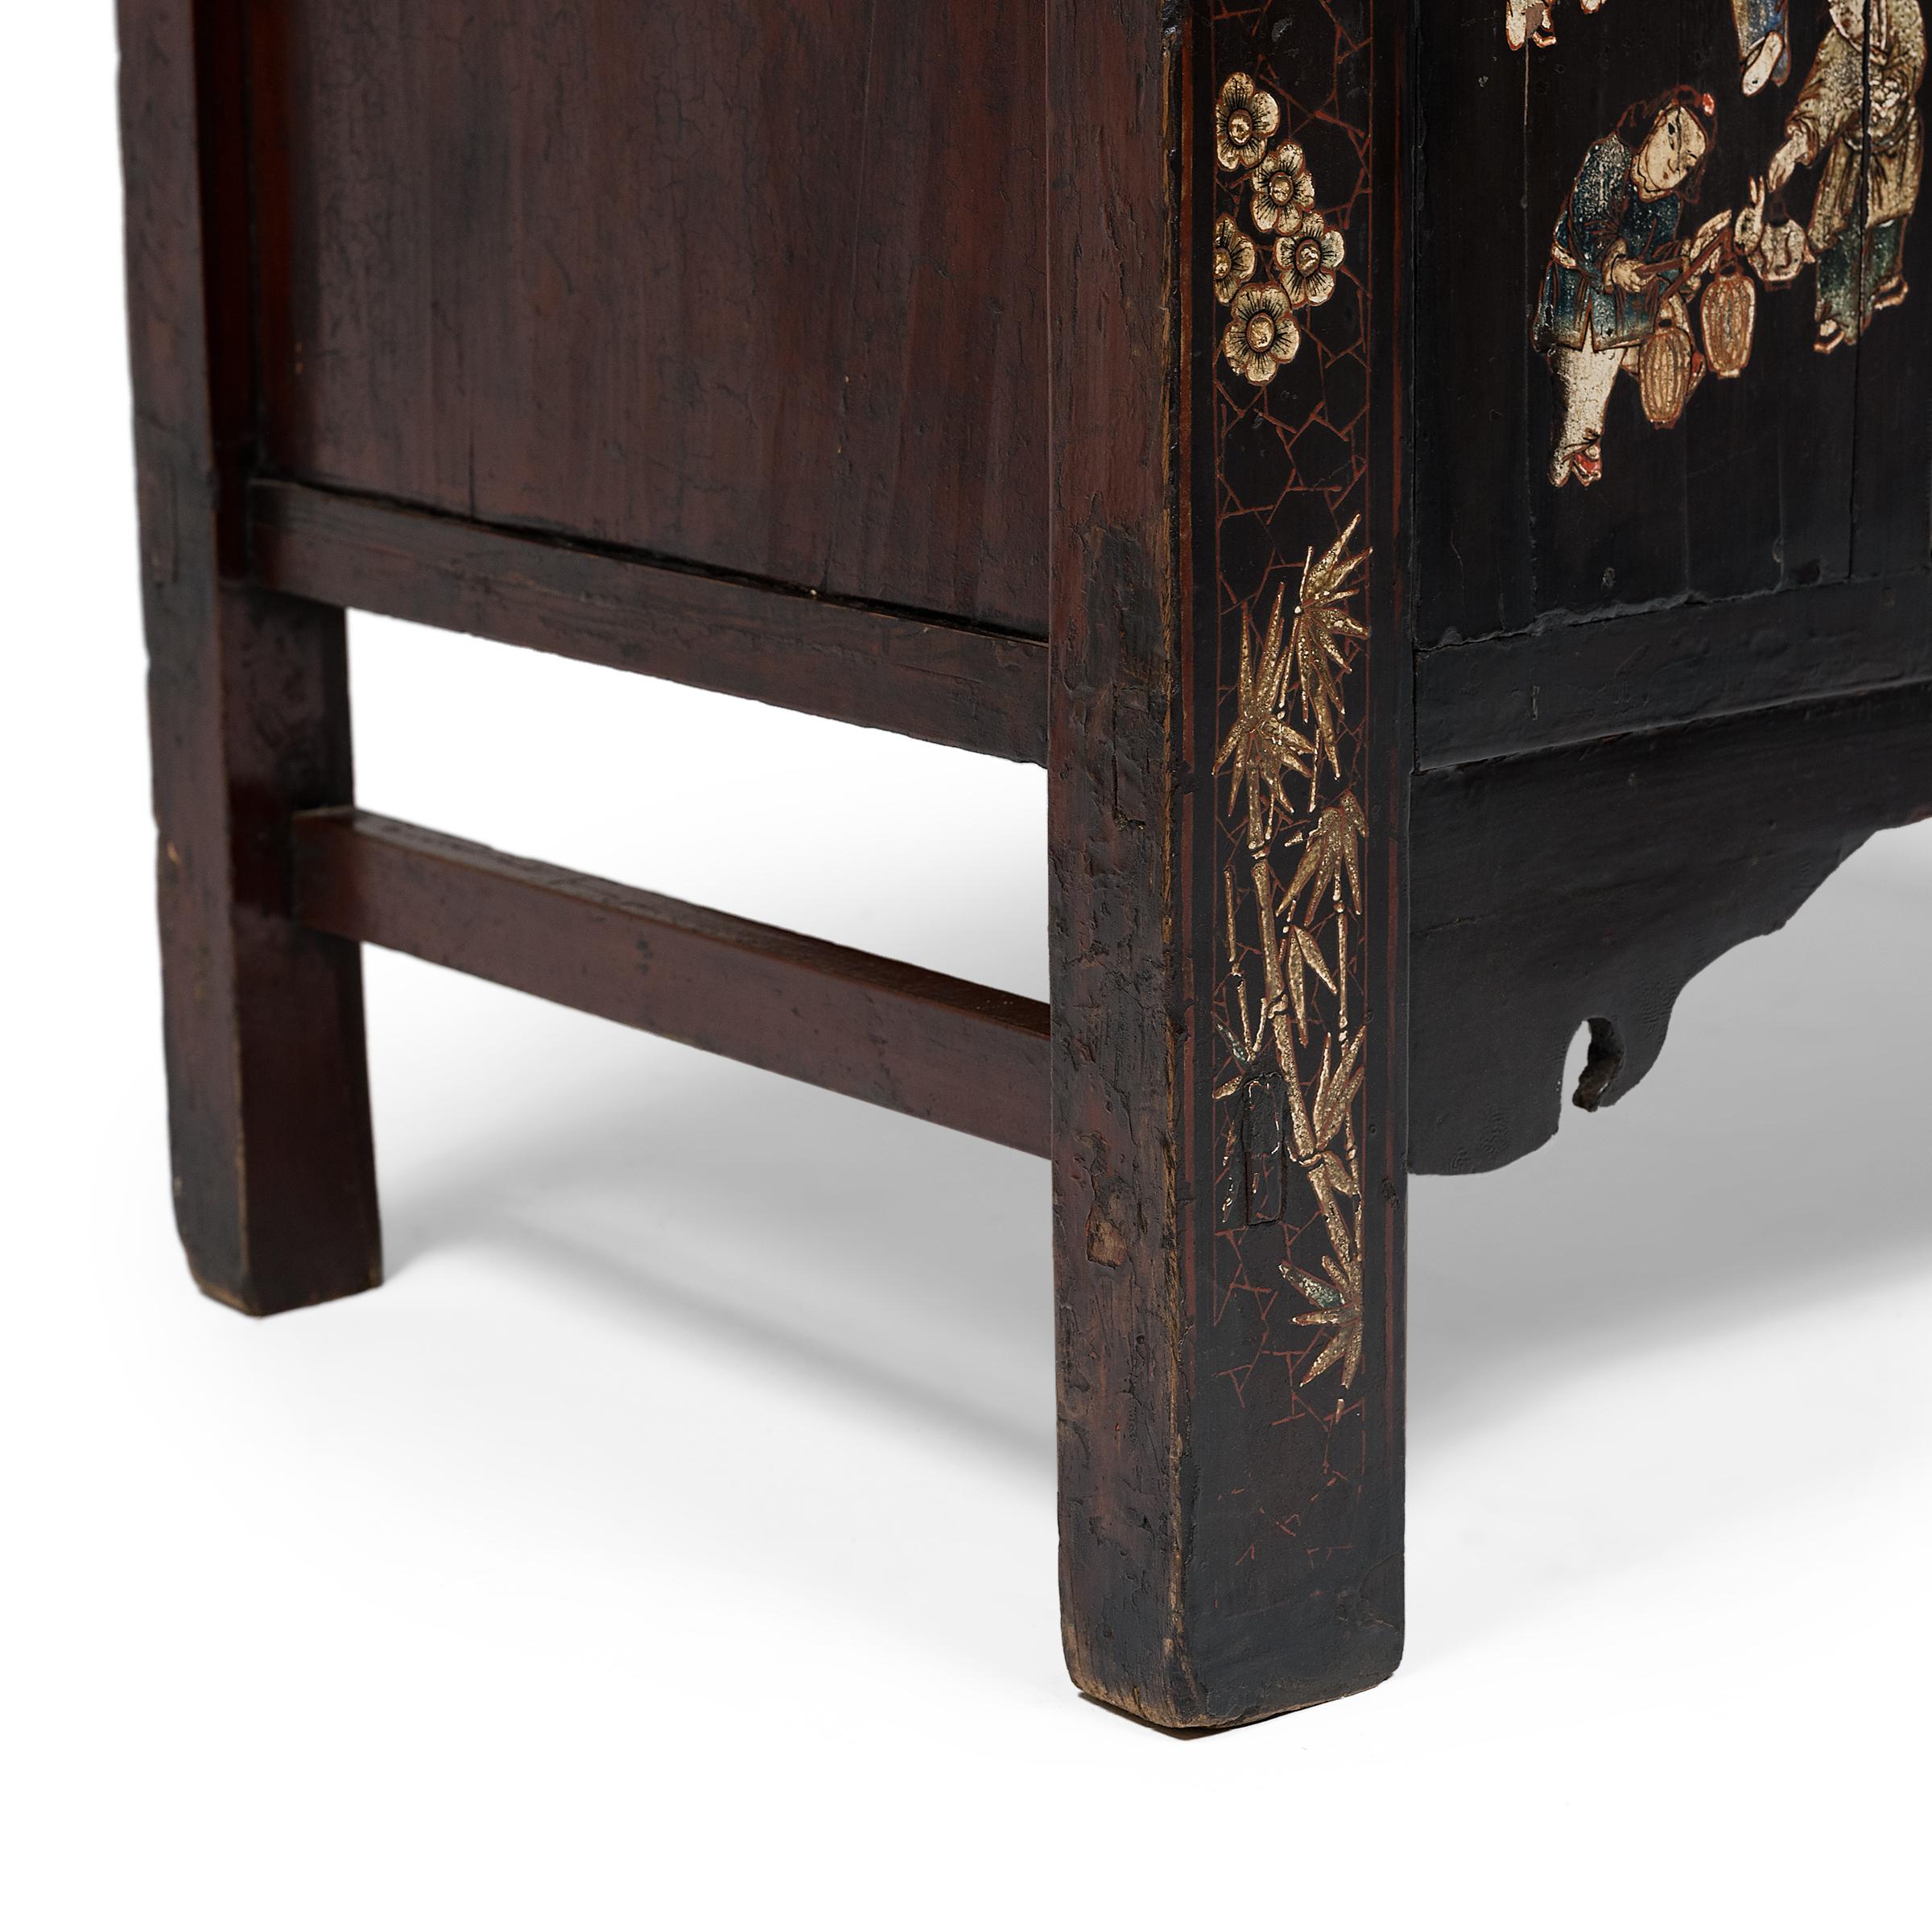 Chinese Painted Black Lacquer Scholars' Cabinet, c. 1800 For Sale 6